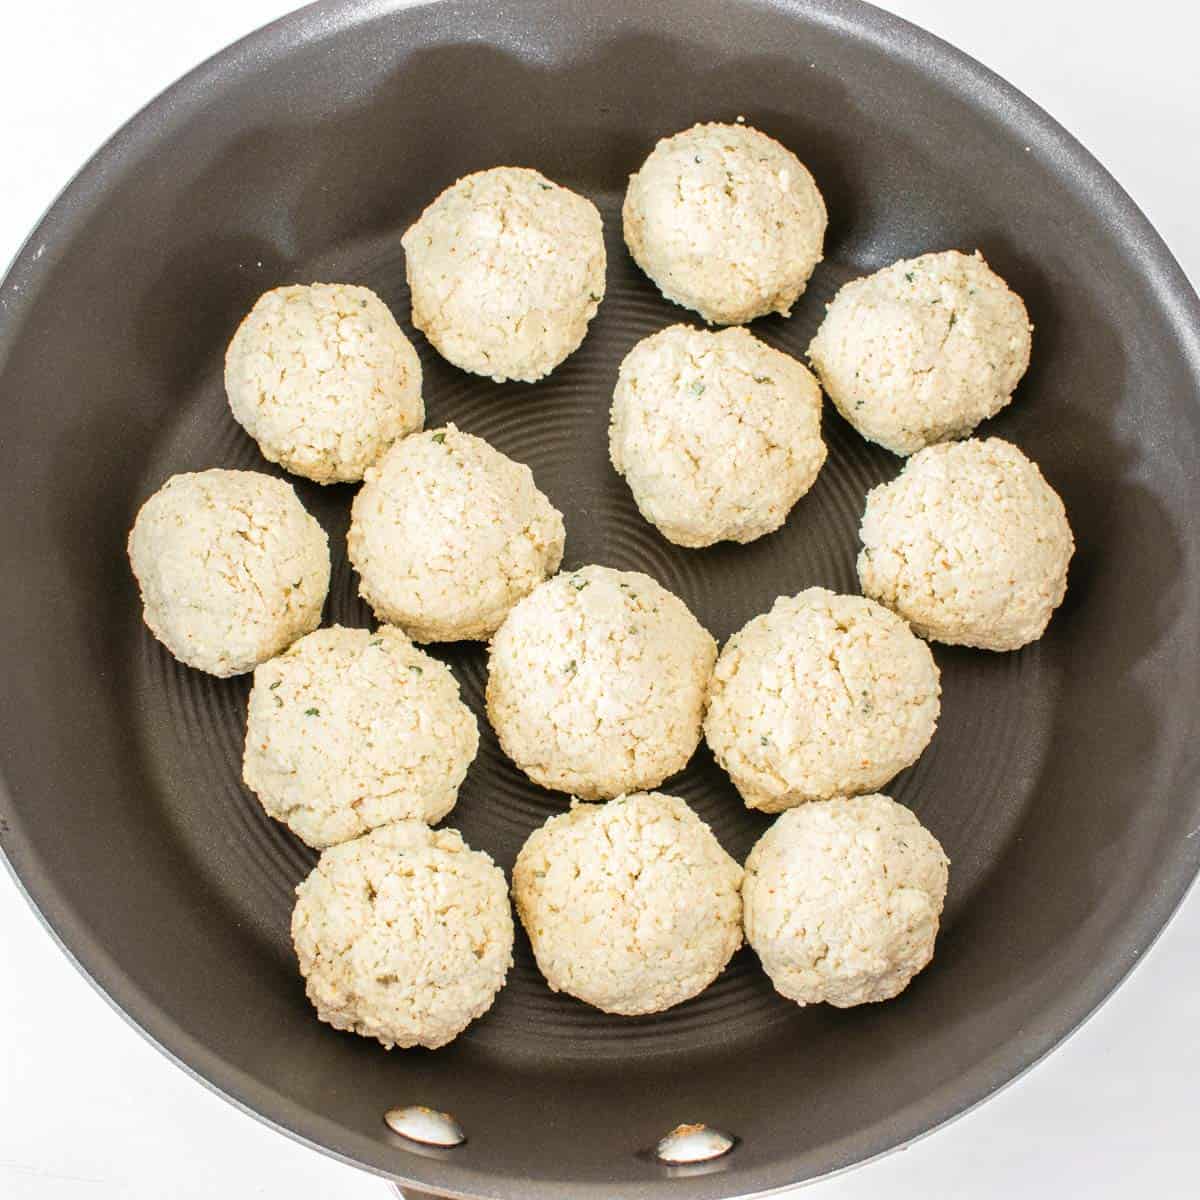 shaped meatballs in a cooking nonstick pan.